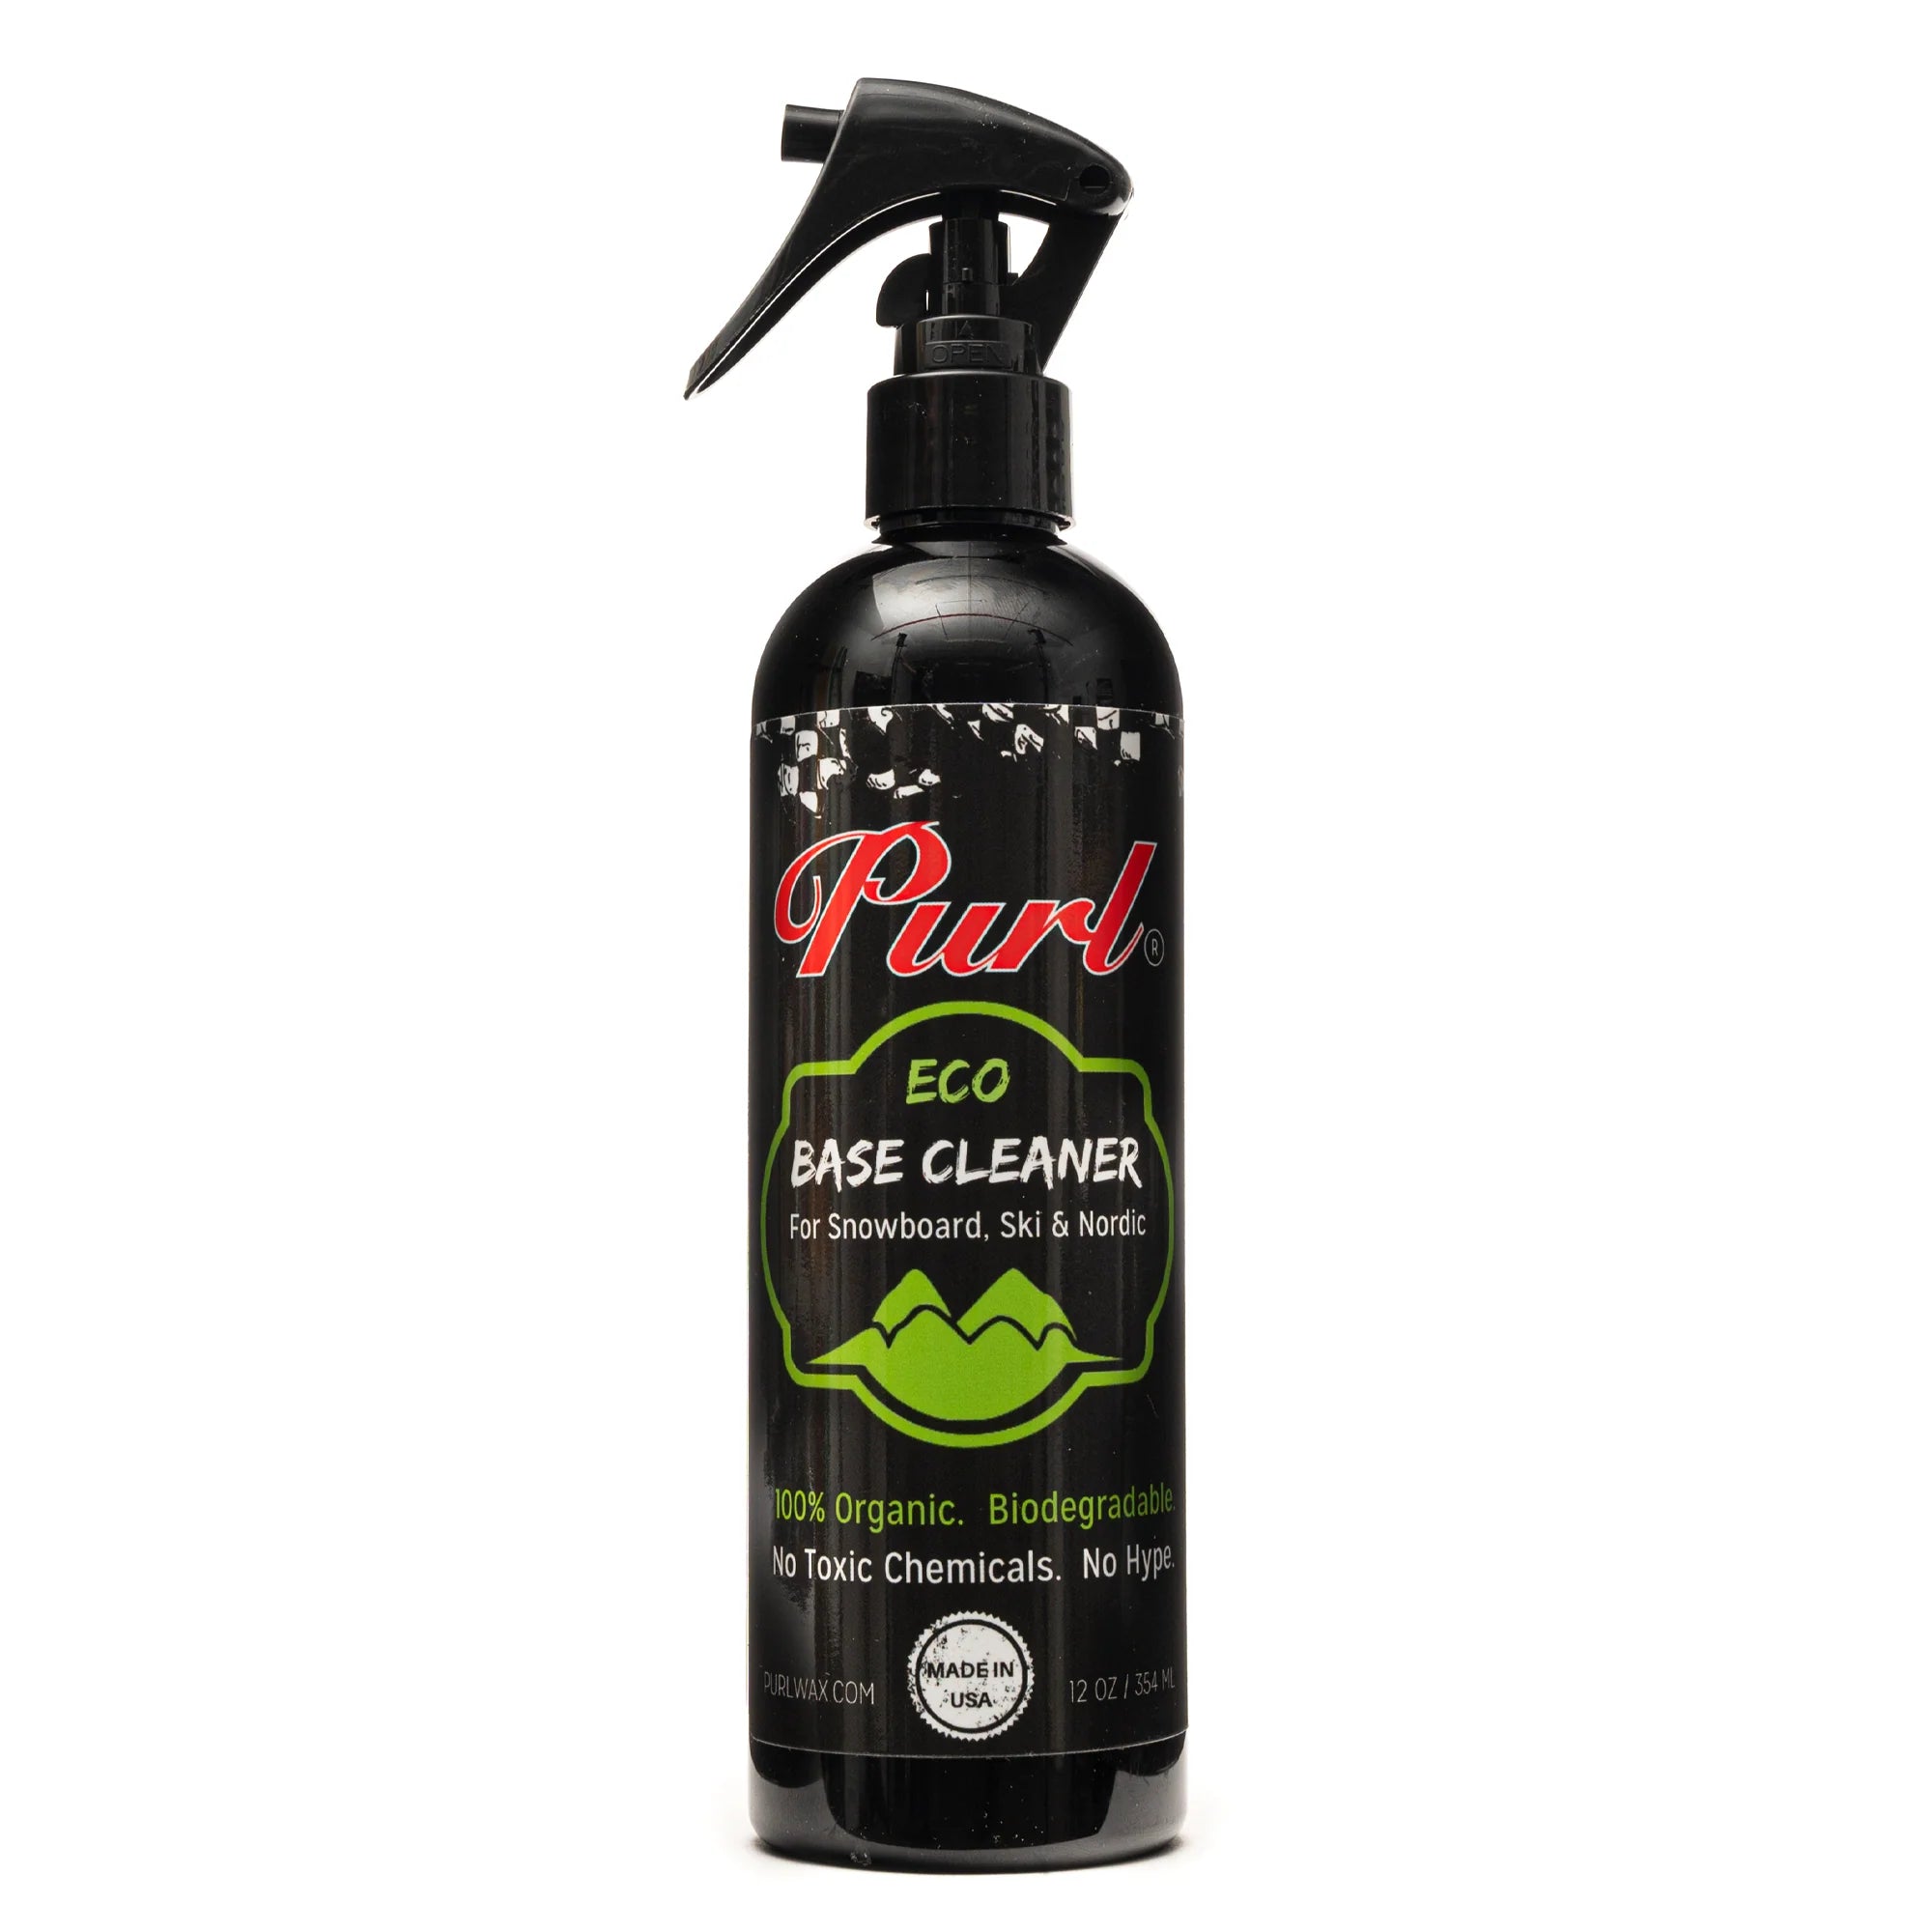 SNOWBOARD PURL Eco Base Cleaner – Alleydesigns Pty Ltd ABN: 44165571264